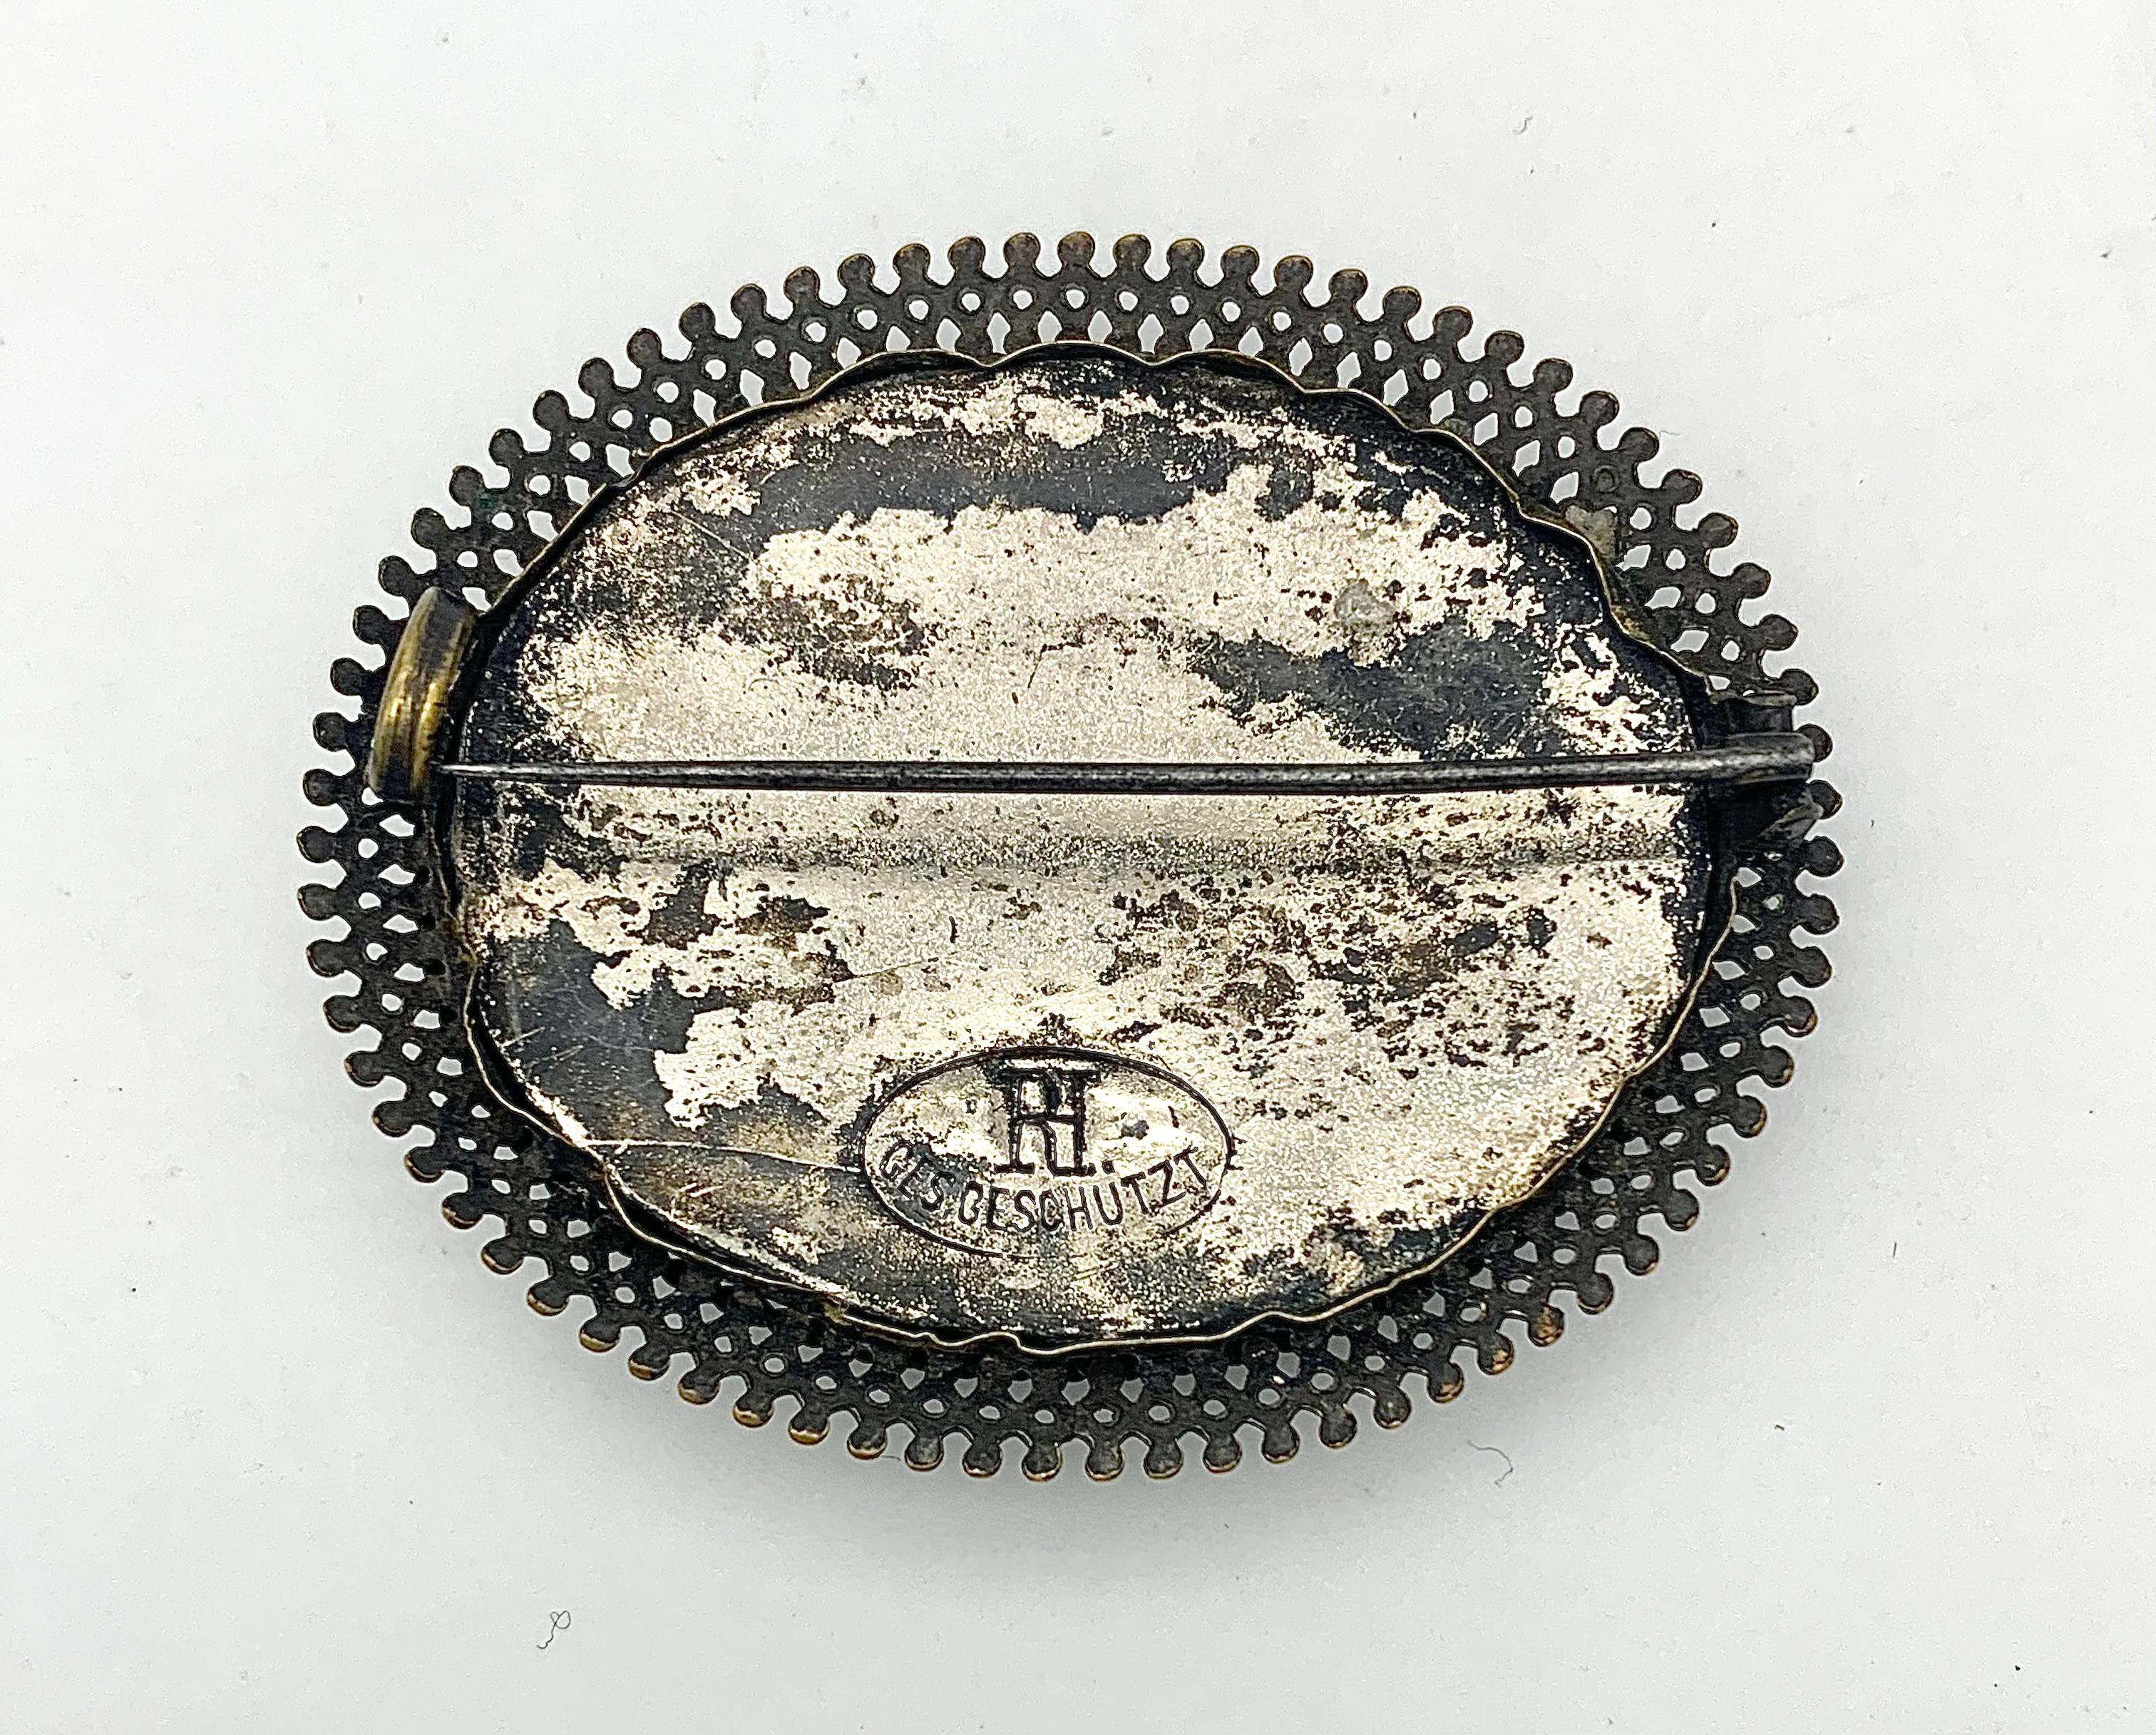 This unusual brooch features a miniature diorama hand carved out of cork. The oval diorama shows a fortress surrounded by trees under a pale blue sky.. The cork carving is lined with painted paper and mounted in a mixed metall frame. The brooch has